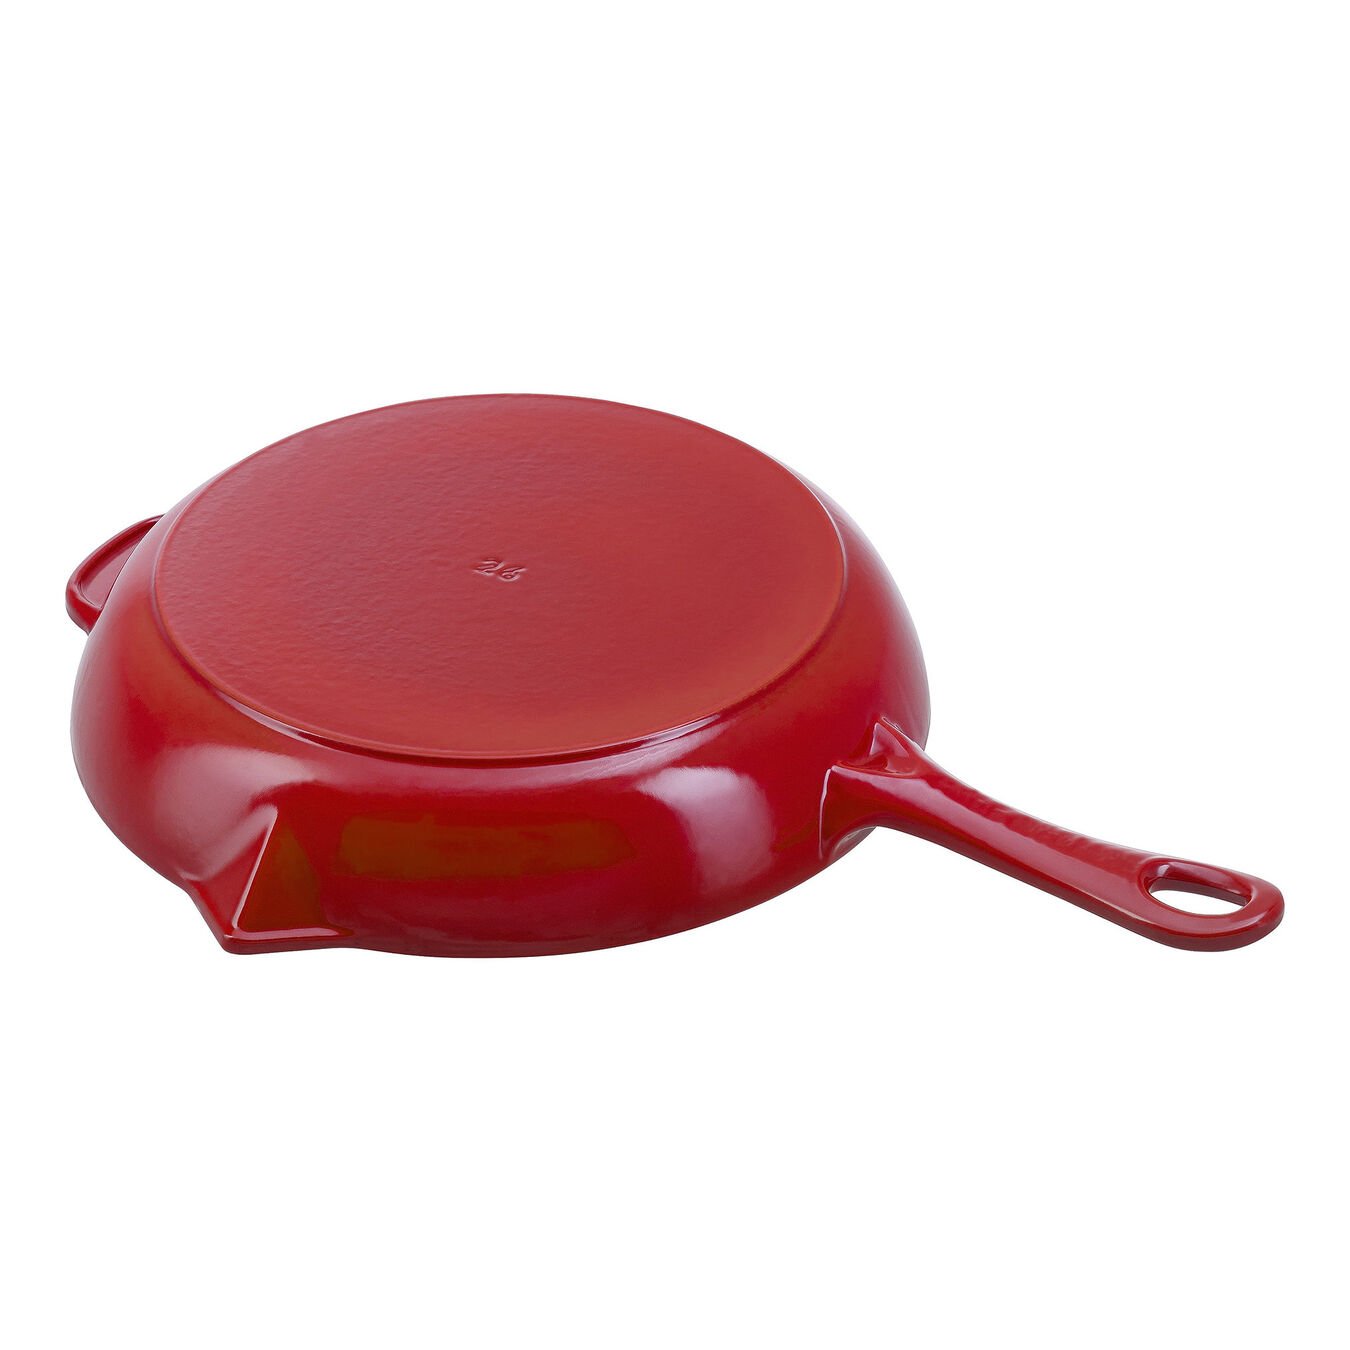 26 cm / 10 inch cast iron Frying pan with pouring spout, cherry - Visual Imperfections,,large 3